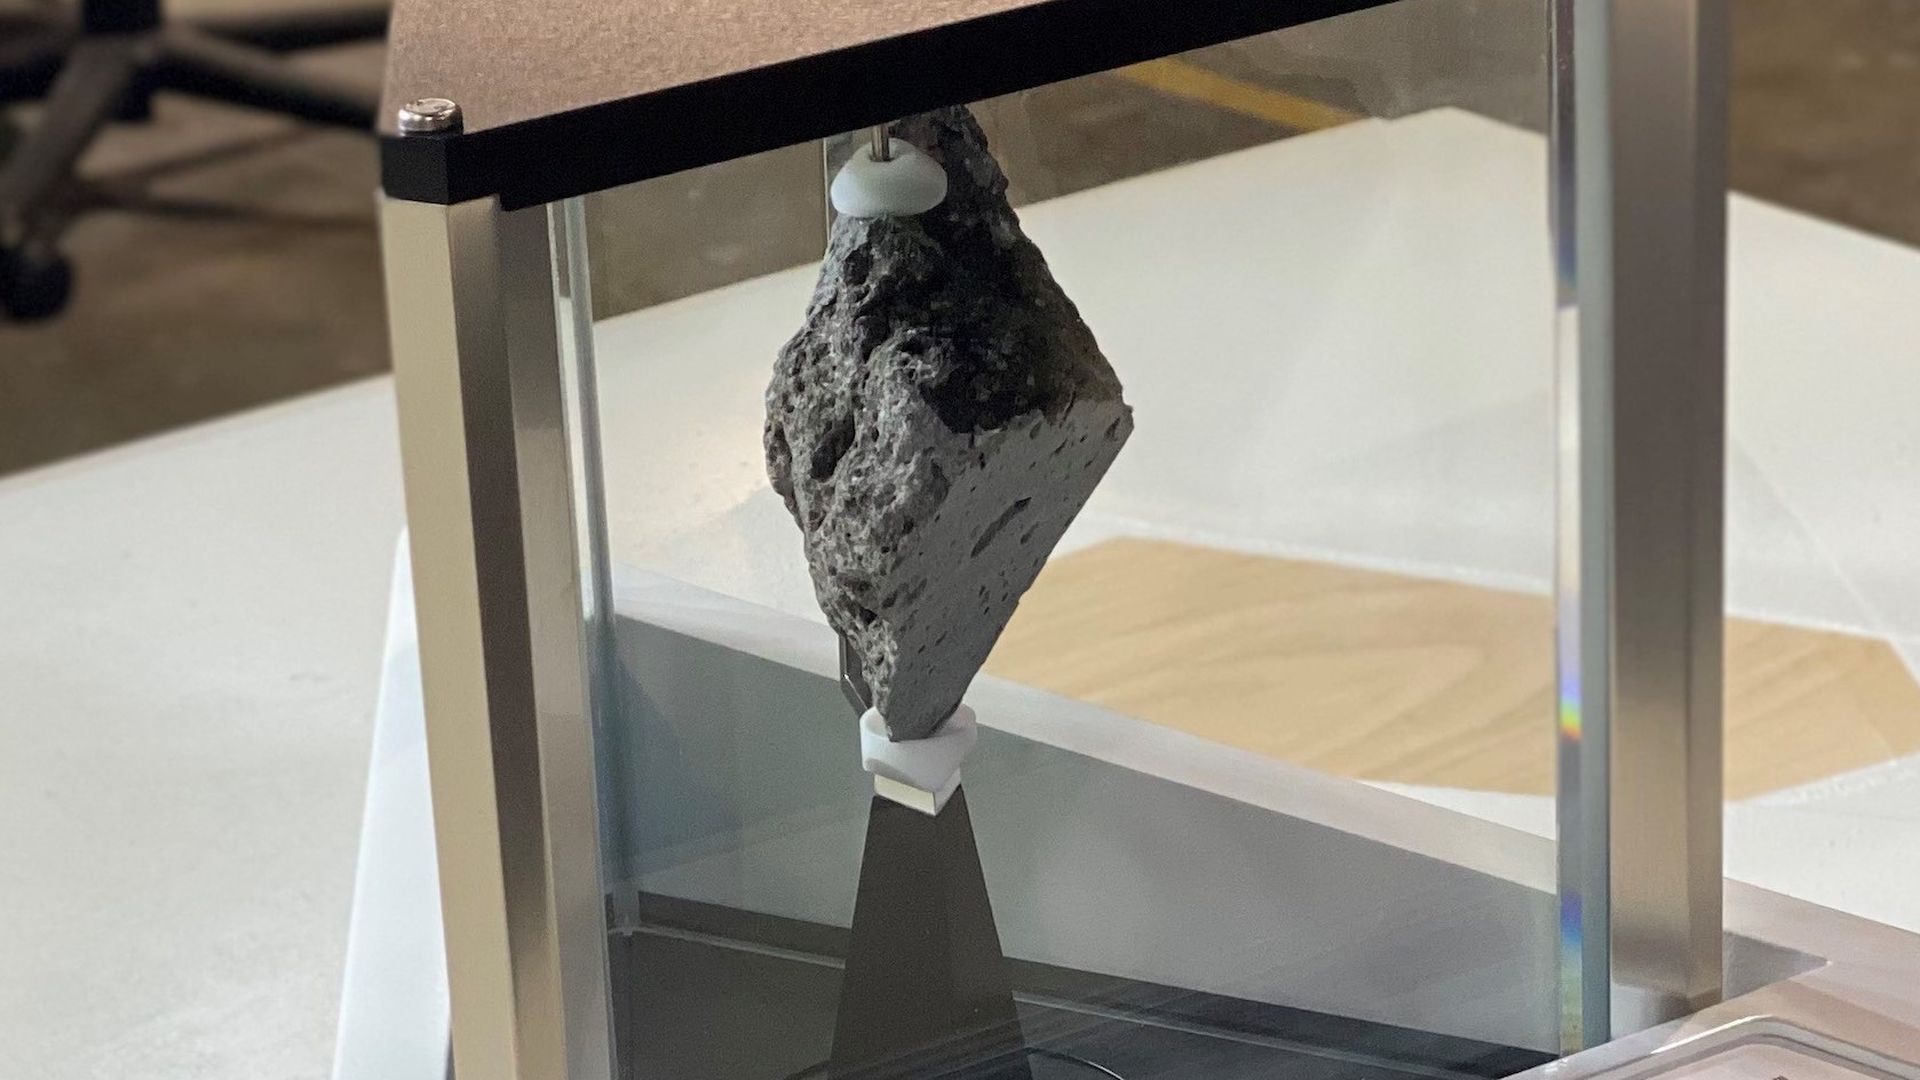 The Moon rock now on display in the Oval Office